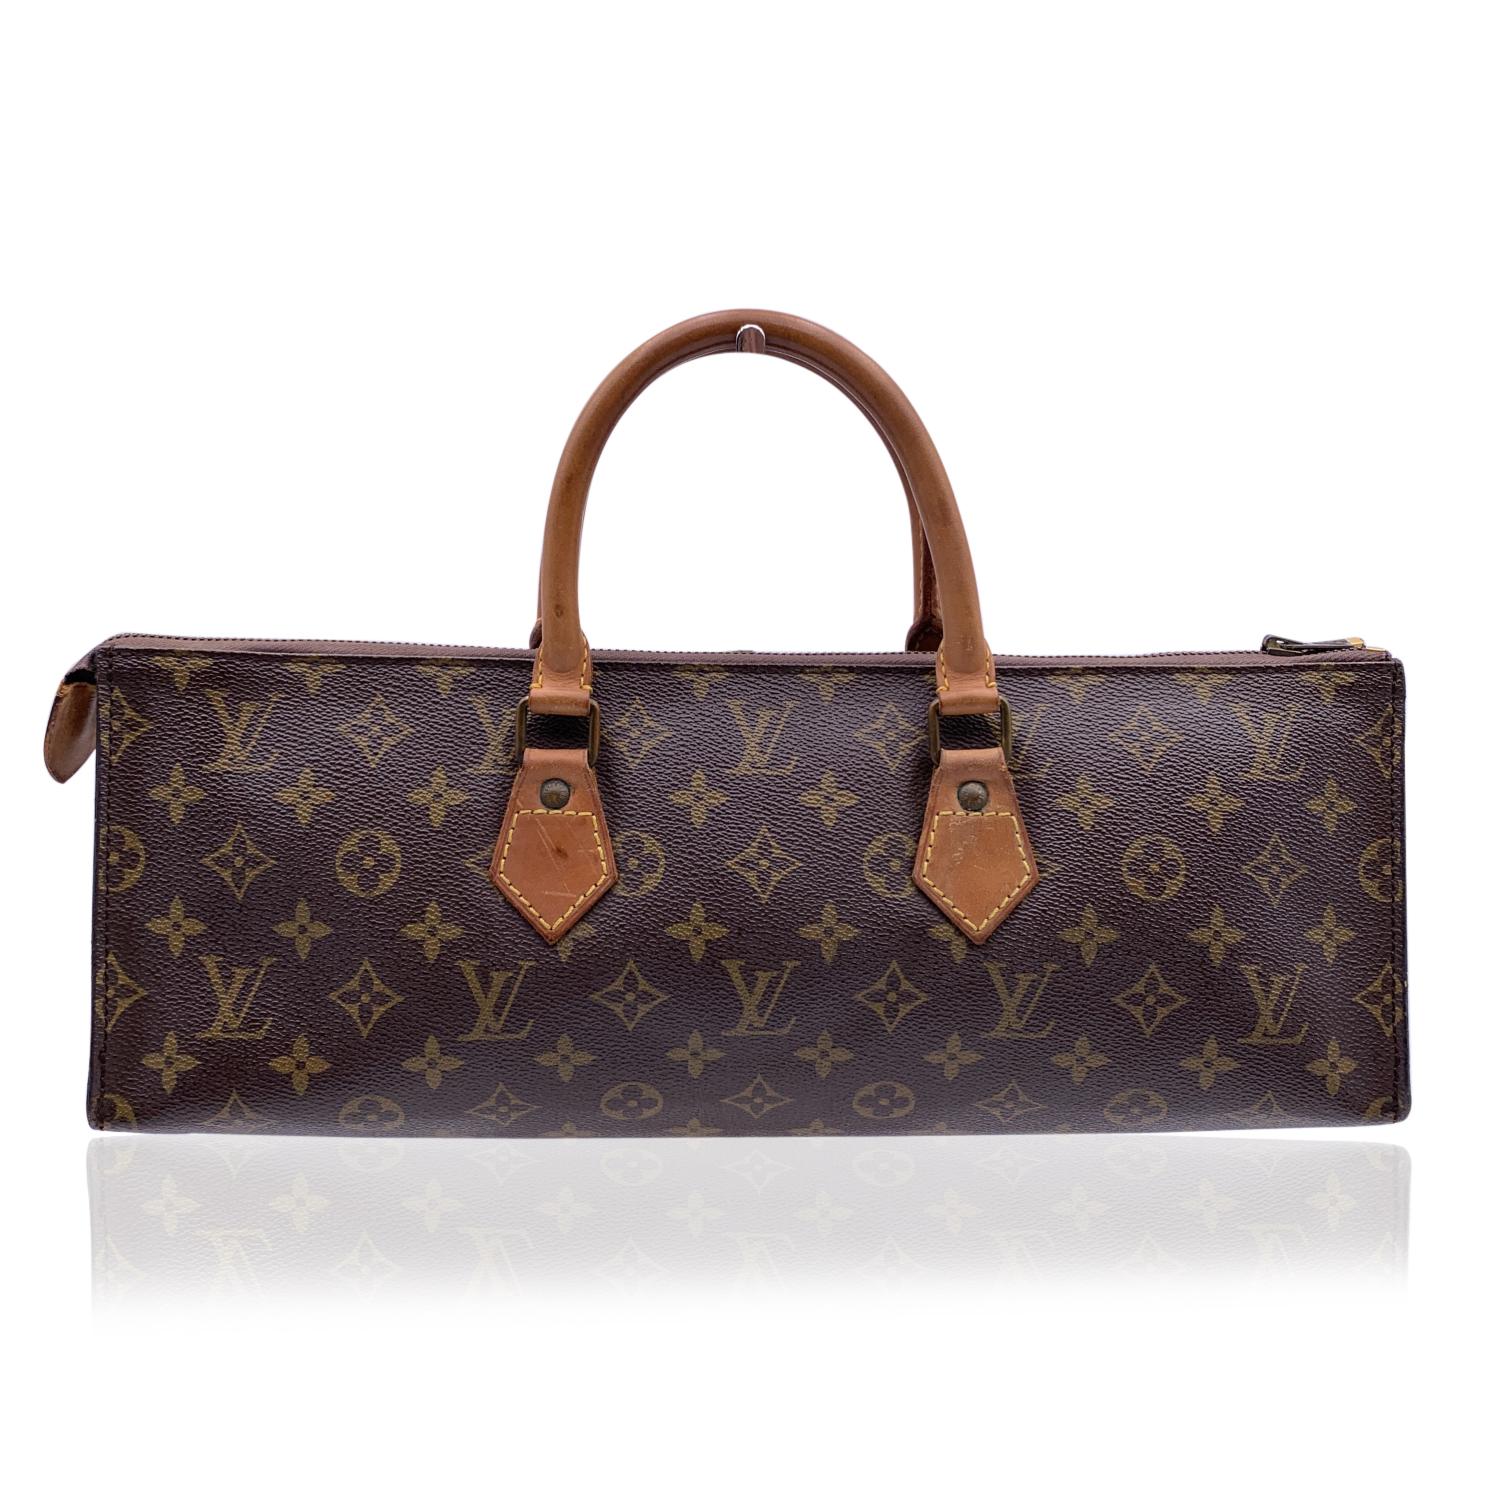 Beautiful Louis Vuitton 'Sac Tricot' (or 'Sac Triangle') handbag in brown monogram canvas with genuine leather handles.The design is inspired by a model used to hold knitting tools. Upper zipper closure. Leather lining. 'LOUIS VUITTON Paris - made